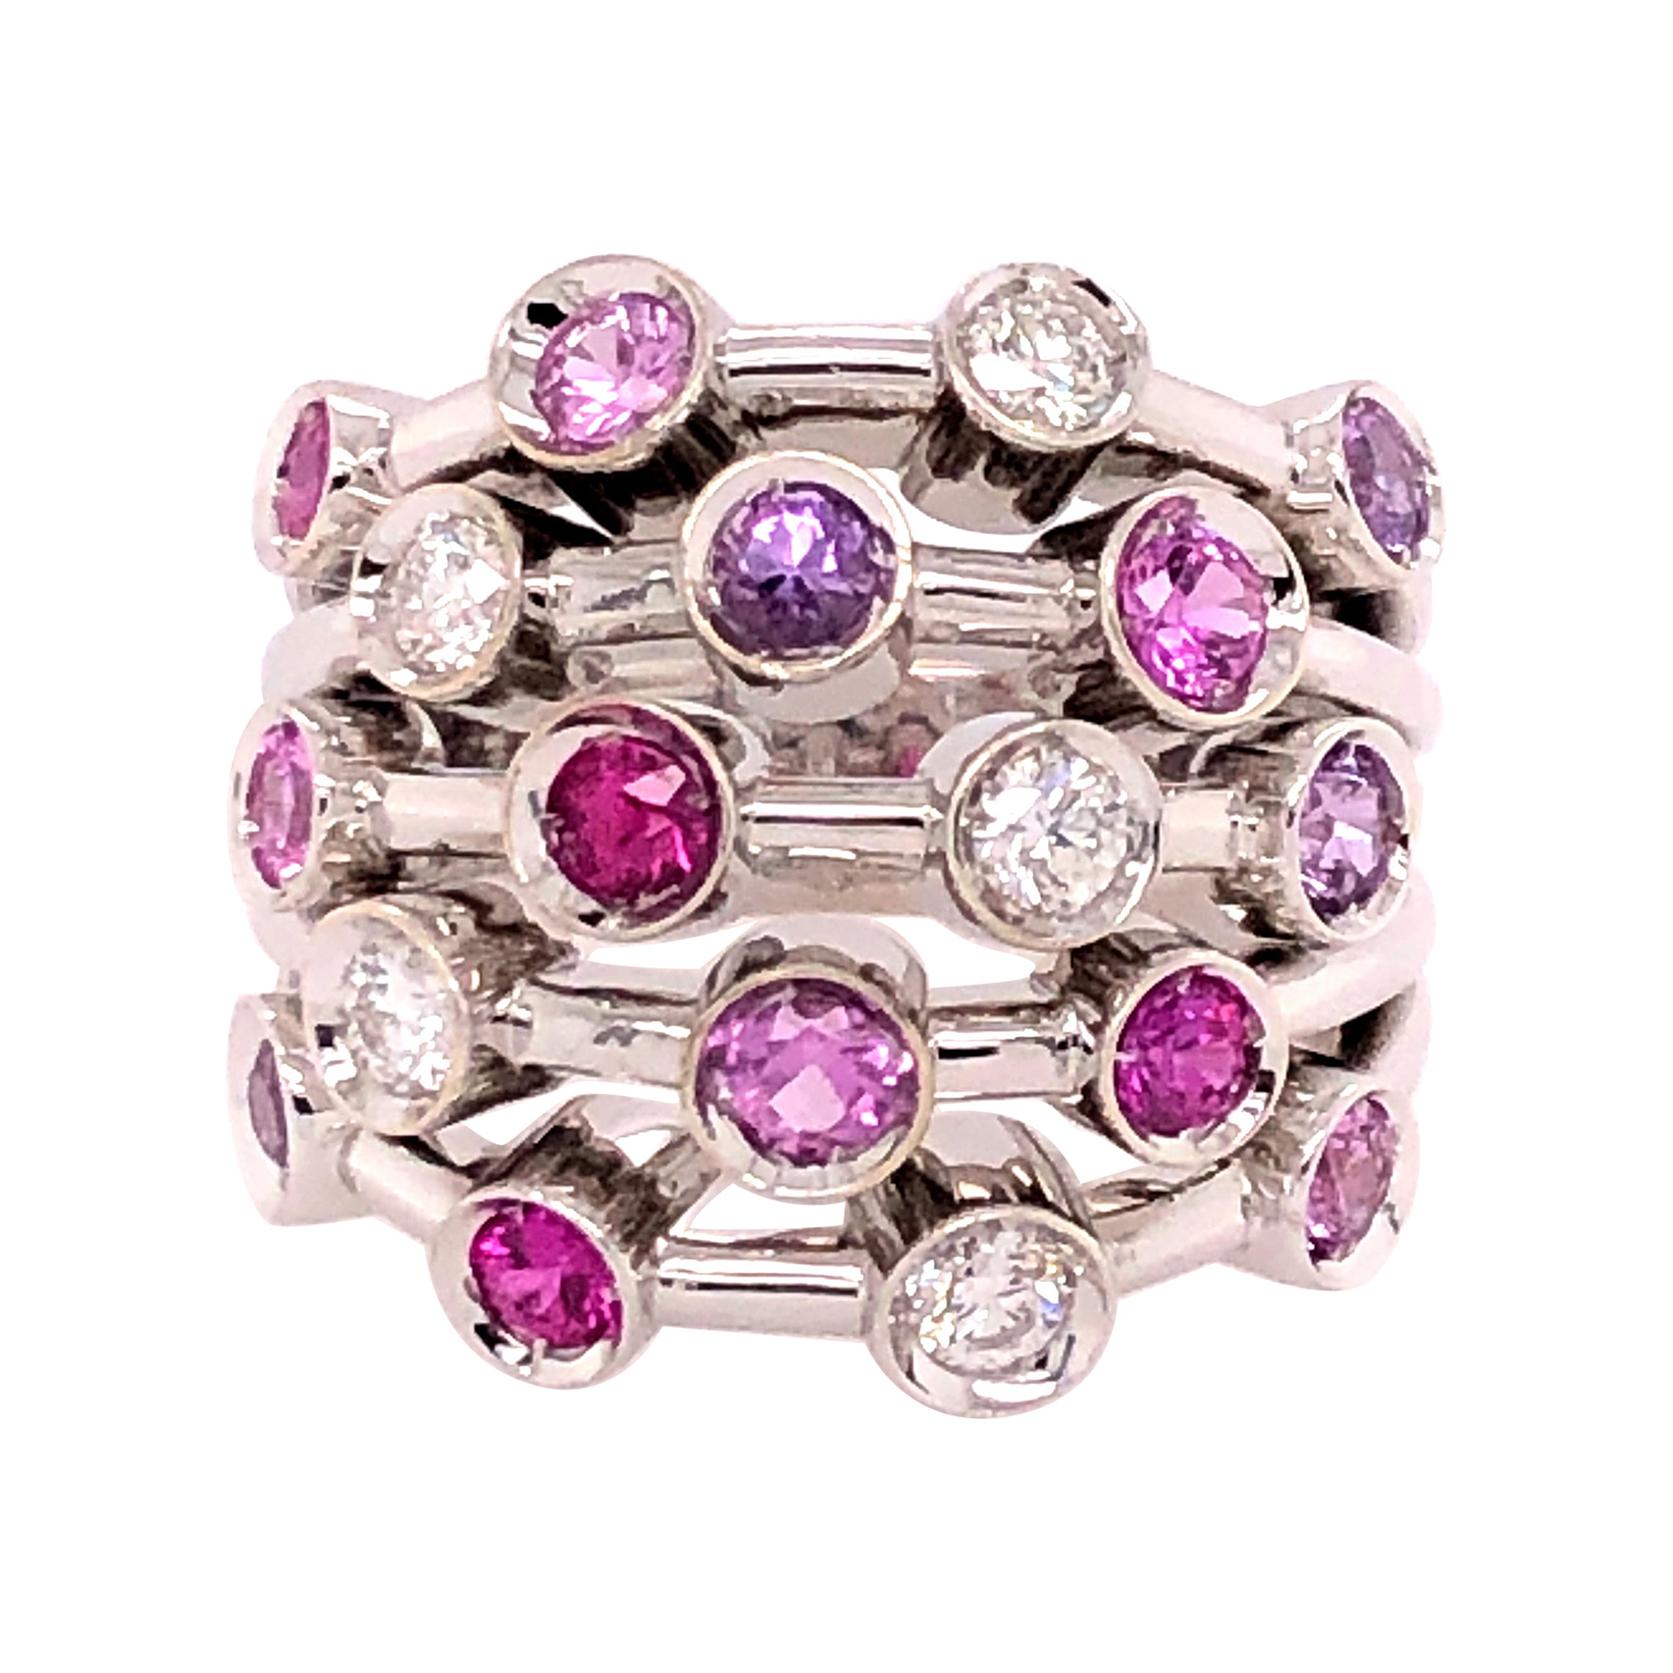 Chanel 18 Karat White Gold 5-Row Diamond, Pink Sapphire, Ruby Ring For Sale